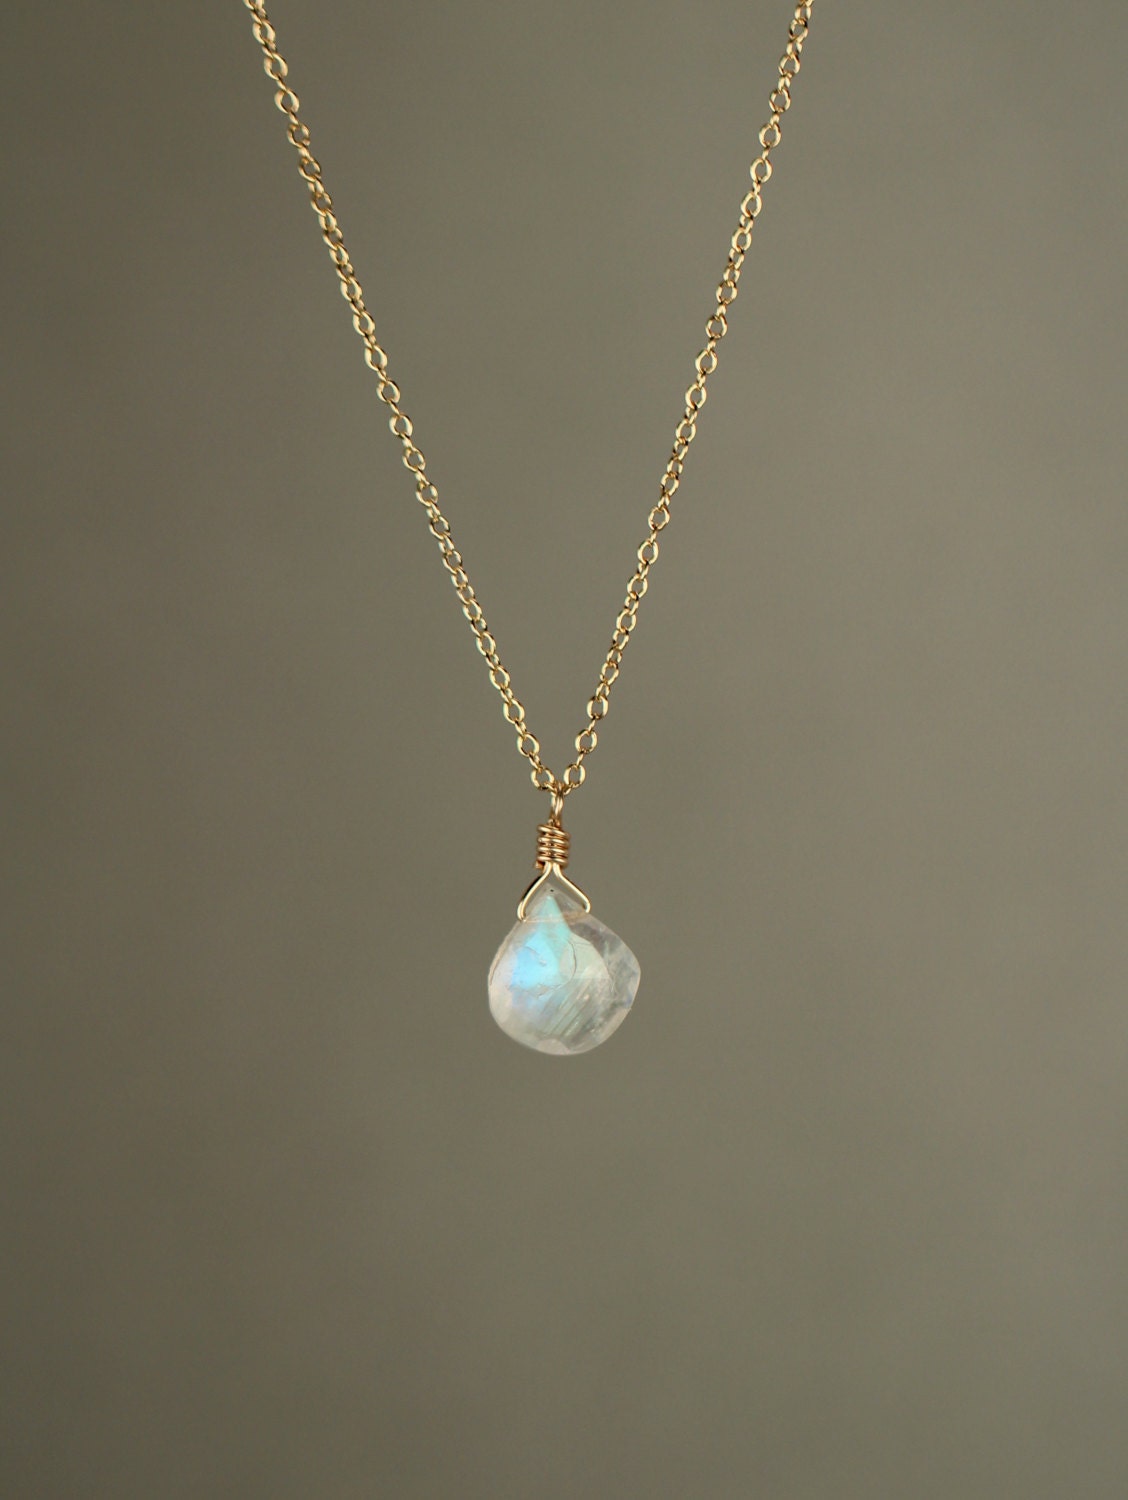 Moonstone necklace rainbow moonstone necklace dainty and